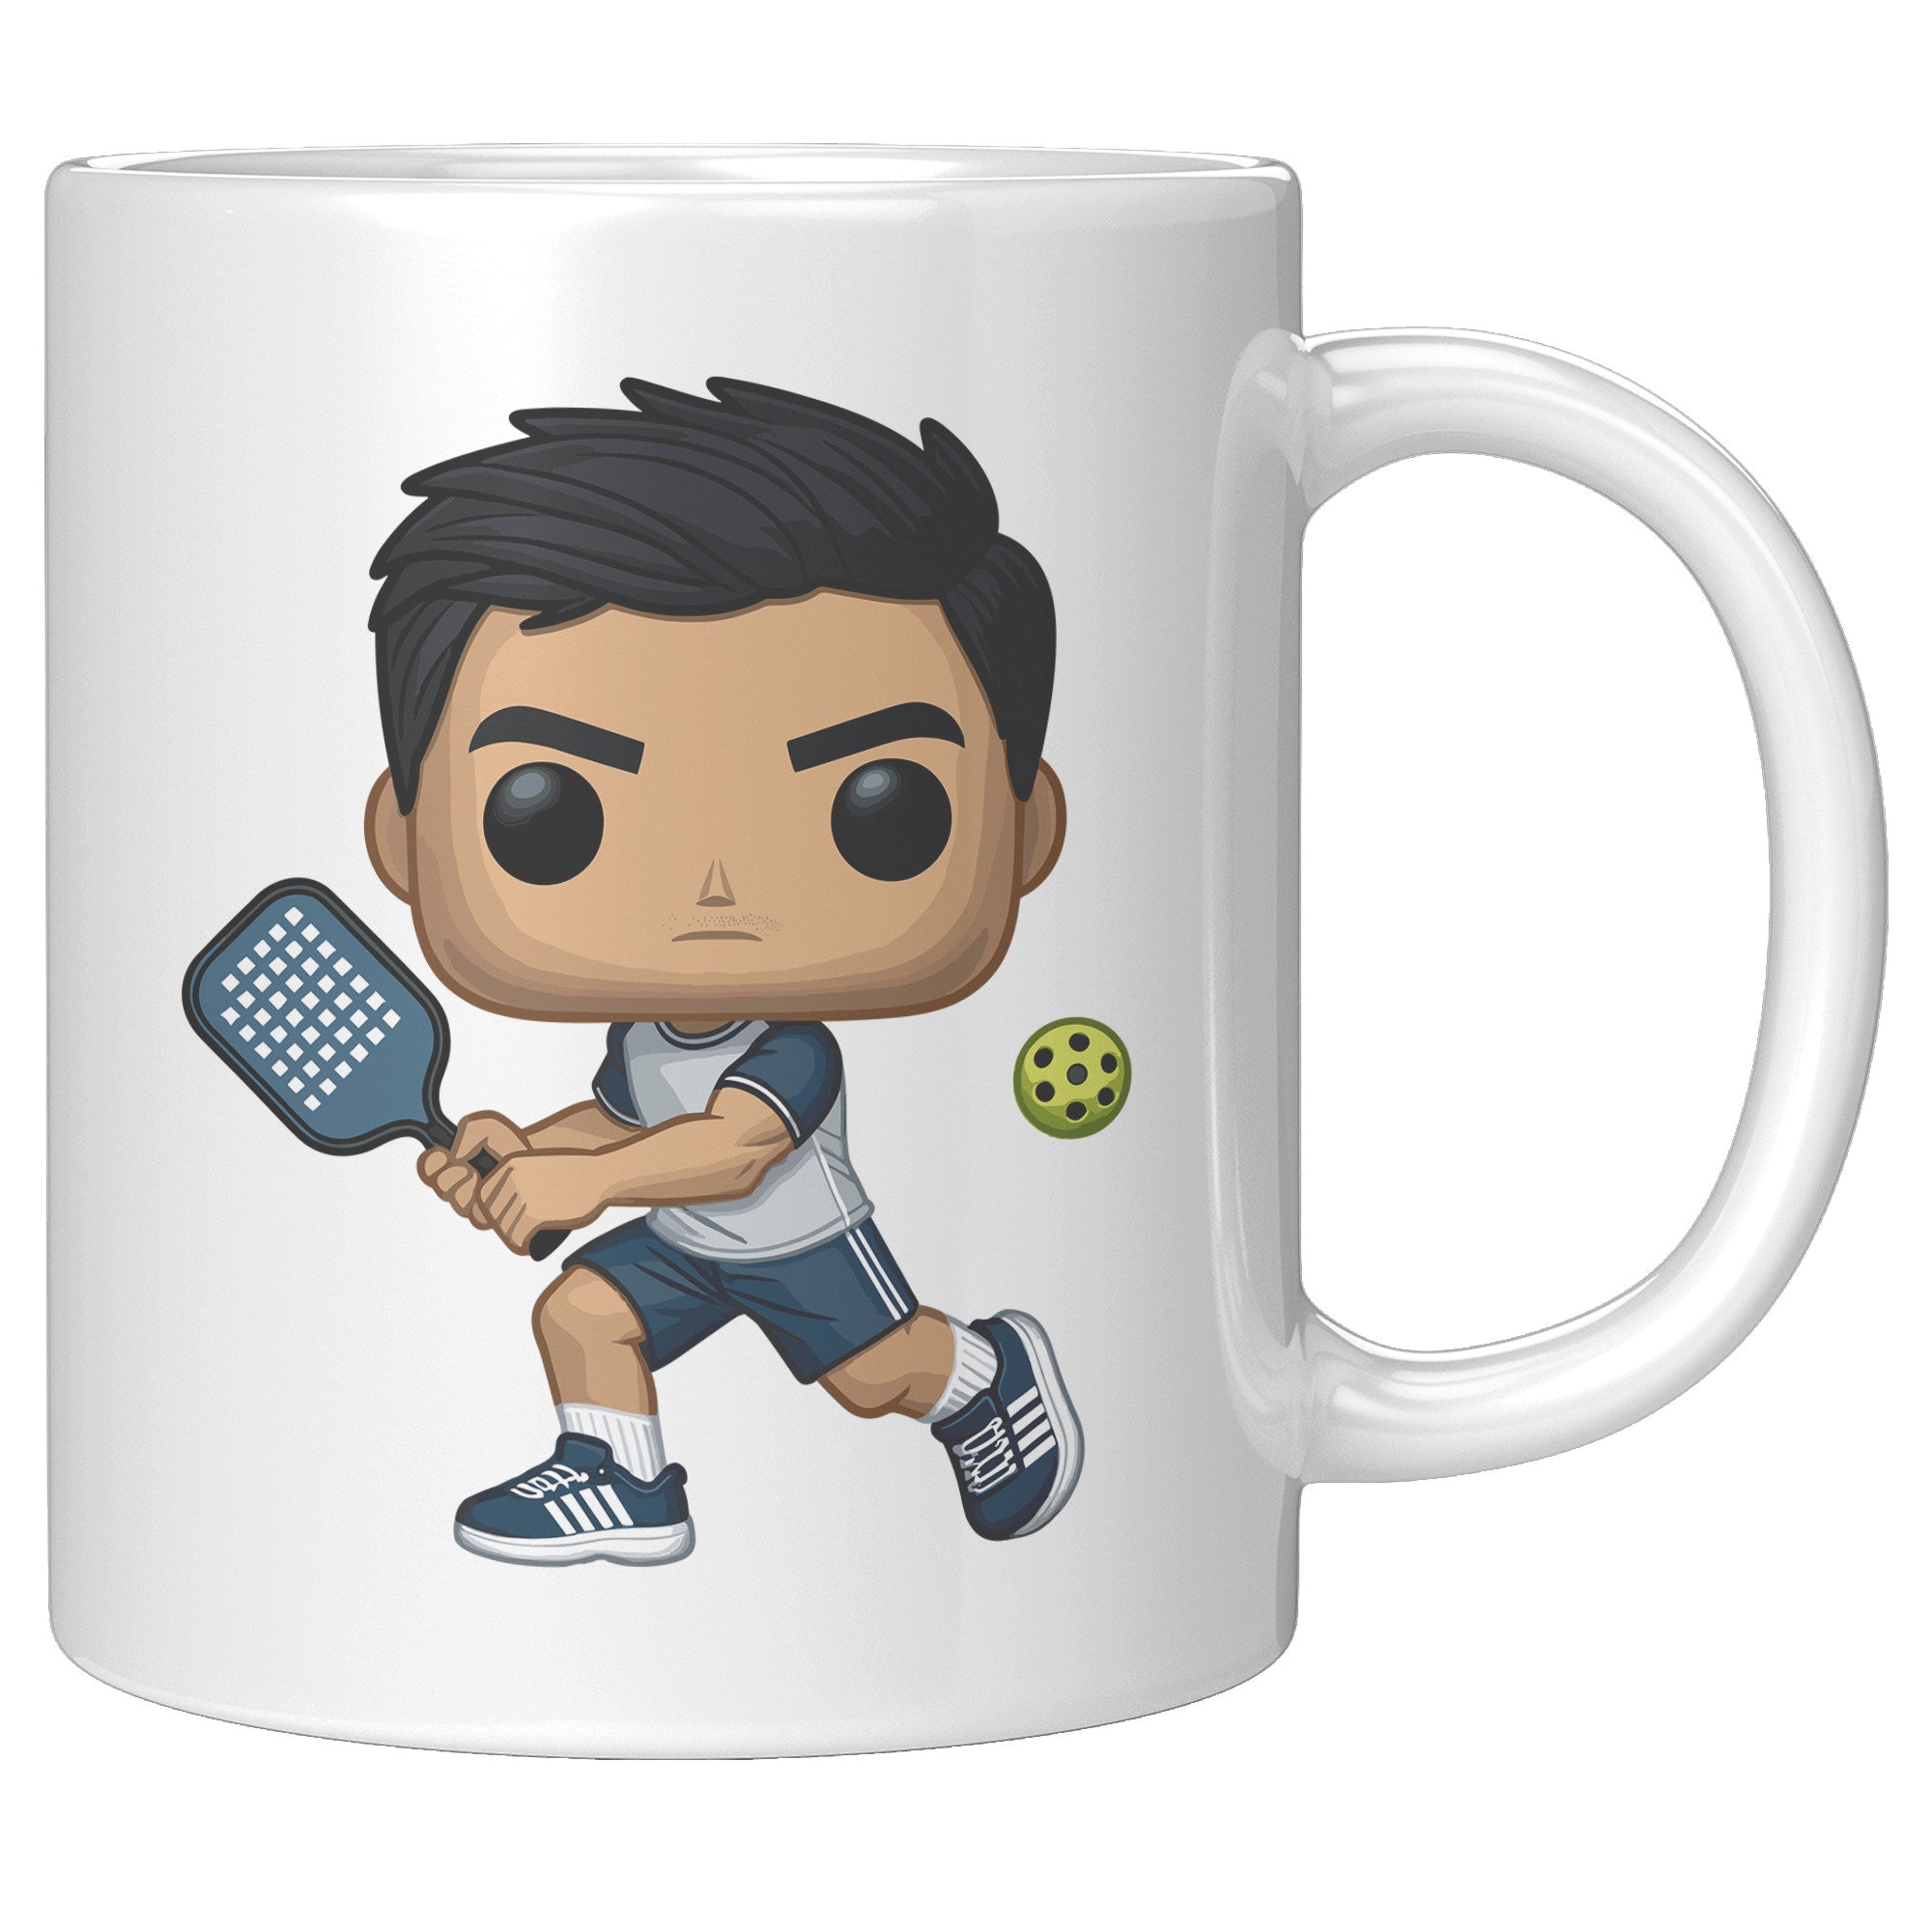 "Funko Pop Style Pickle Ball Player Boy Coffee Mug - Cute Athletic Cup - Perfect Gift for Pickle Ball Enthusiasts - Sporty Boy Apparel" - G